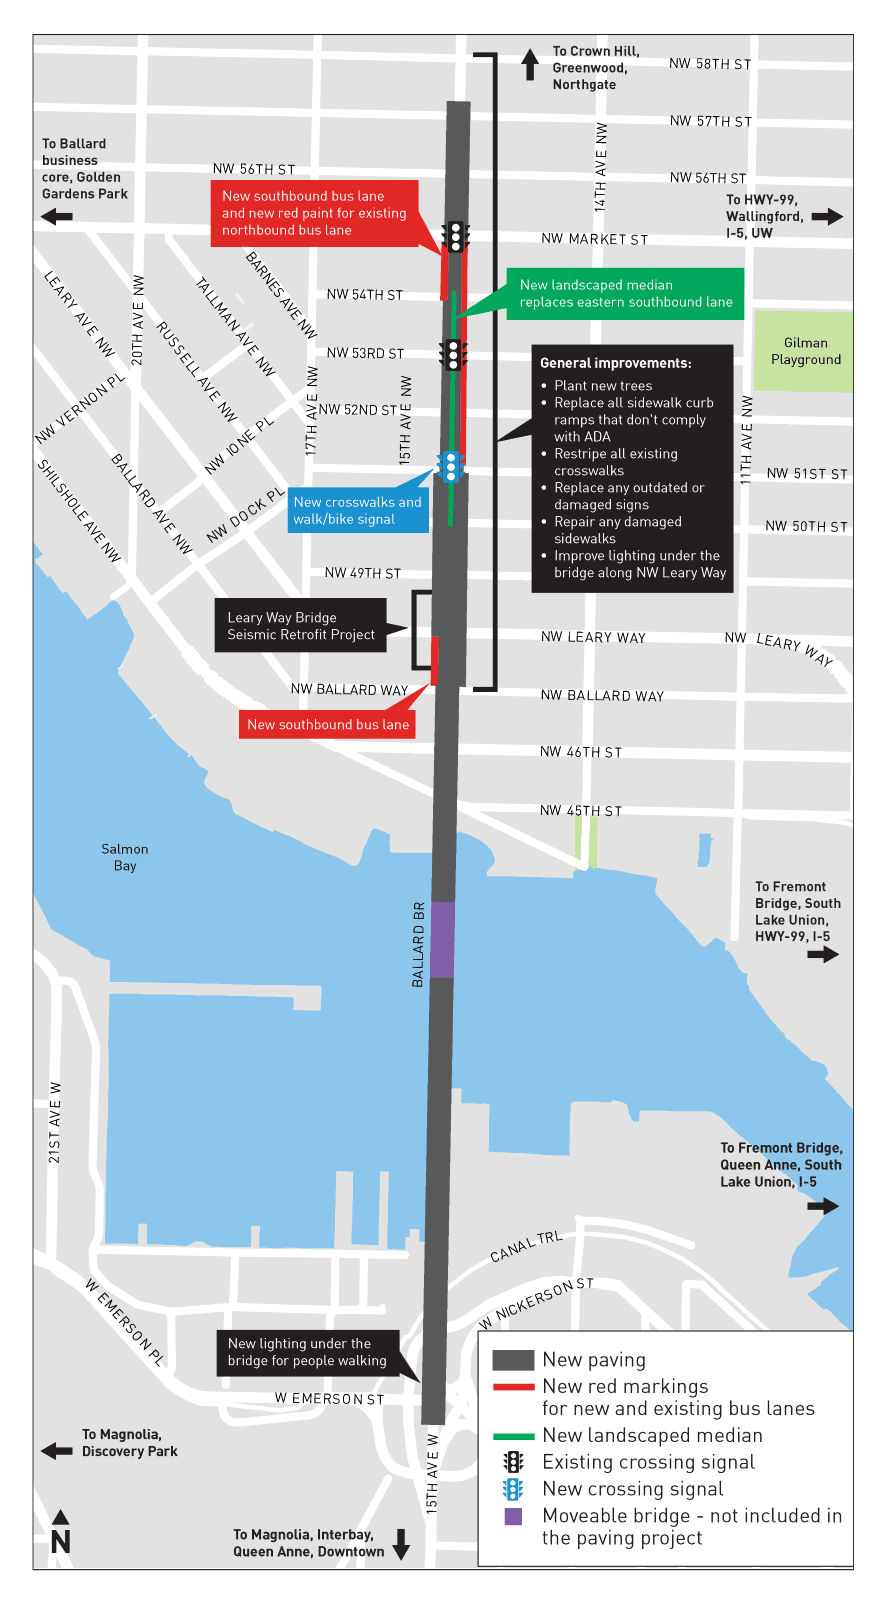 A graphic map displaying the physical locations of the planned enhancements listed above.